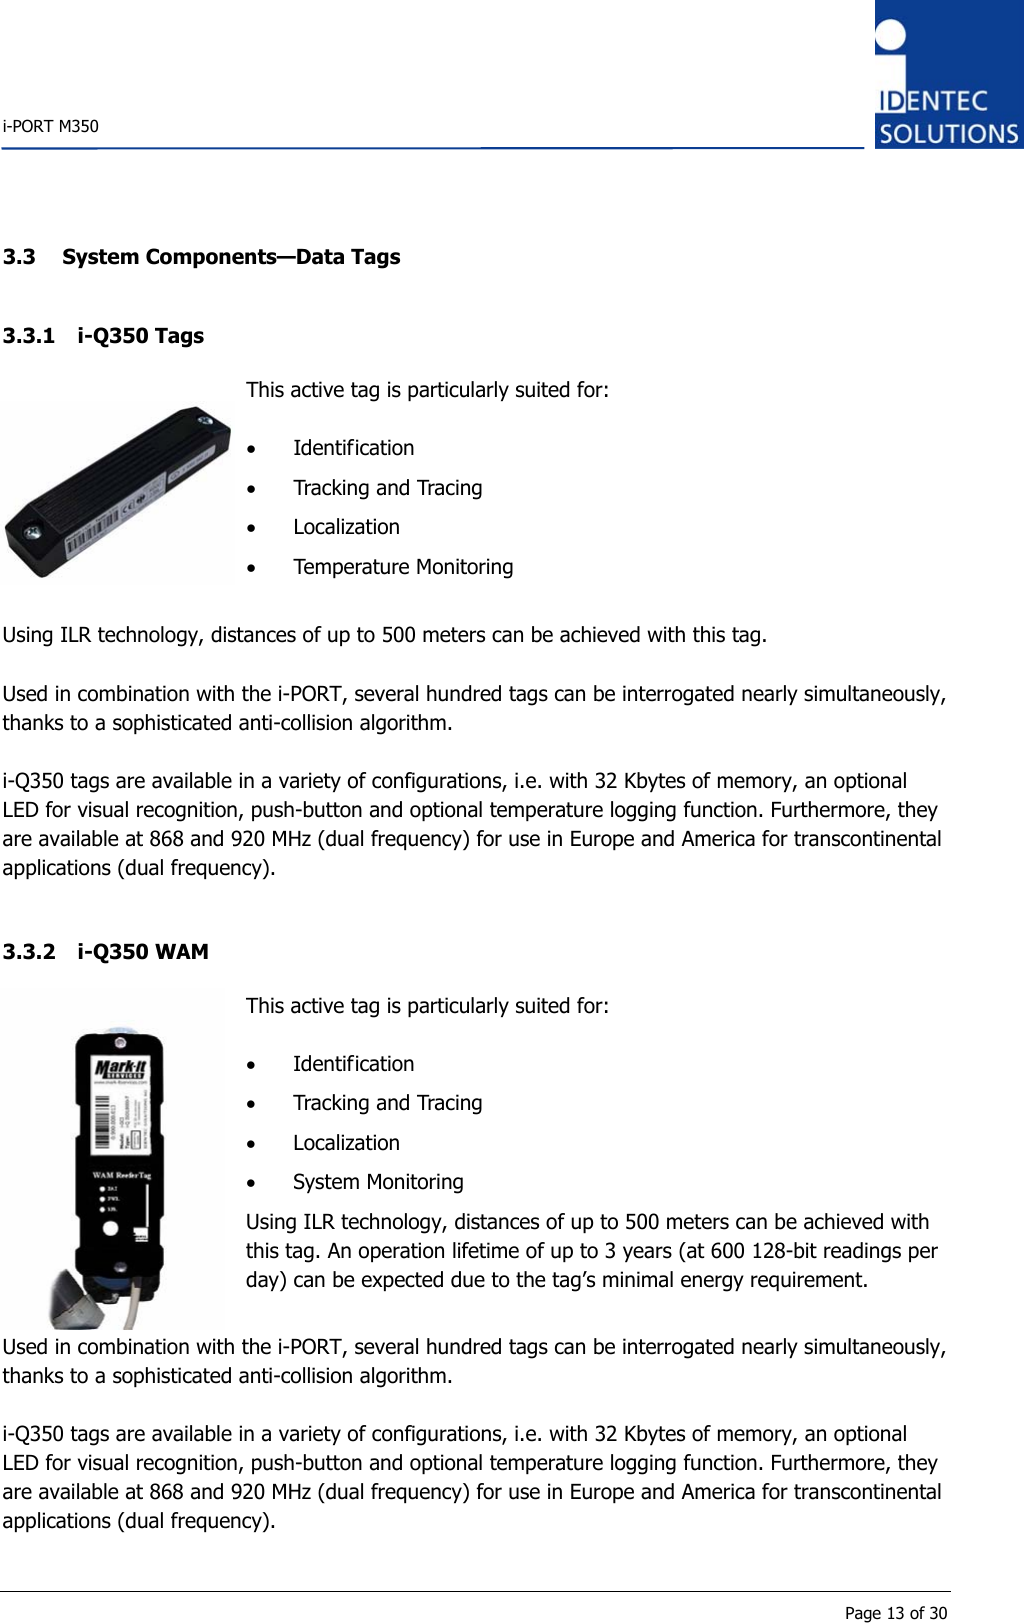    i-PORT M350       Page 13 of 30 3.3 System Components—Data Tags 3.3.1 i-Q350 Tags  This active tag is particularly suited for:  • Identification • Tracking and Tracing • Localization  • Temperature Monitoring  Using ILR technology, distances of up to 500 meters can be achieved with this tag.  Used in combination with the i-PORT, several hundred tags can be interrogated nearly simultaneously, thanks to a sophisticated anti-collision algorithm.  i-Q350 tags are available in a variety of configurations, i.e. with 32 Kbytes of memory, an optional LED for visual recognition, push-button and optional temperature logging function. Furthermore, they are available at 868 and 920 MHz (dual frequency) for use in Europe and America for transcontinental applications (dual frequency).  3.3.2 i-Q350 WAM  This active tag is particularly suited for:  • Identification • Tracking and Tracing • Localization  • System Monitoring Using ILR technology, distances of up to 500 meters can be achieved with this tag. An operation lifetime of up to 3 years (at 600 128-bit readings per day) can be expected due to the tag’s minimal energy requirement. Used in combination with the i-PORT, several hundred tags can be interrogated nearly simultaneously, thanks to a sophisticated anti-collision algorithm.  i-Q350 tags are available in a variety of configurations, i.e. with 32 Kbytes of memory, an optional LED for visual recognition, push-button and optional temperature logging function. Furthermore, they are available at 868 and 920 MHz (dual frequency) for use in Europe and America for transcontinental applications (dual frequency).  